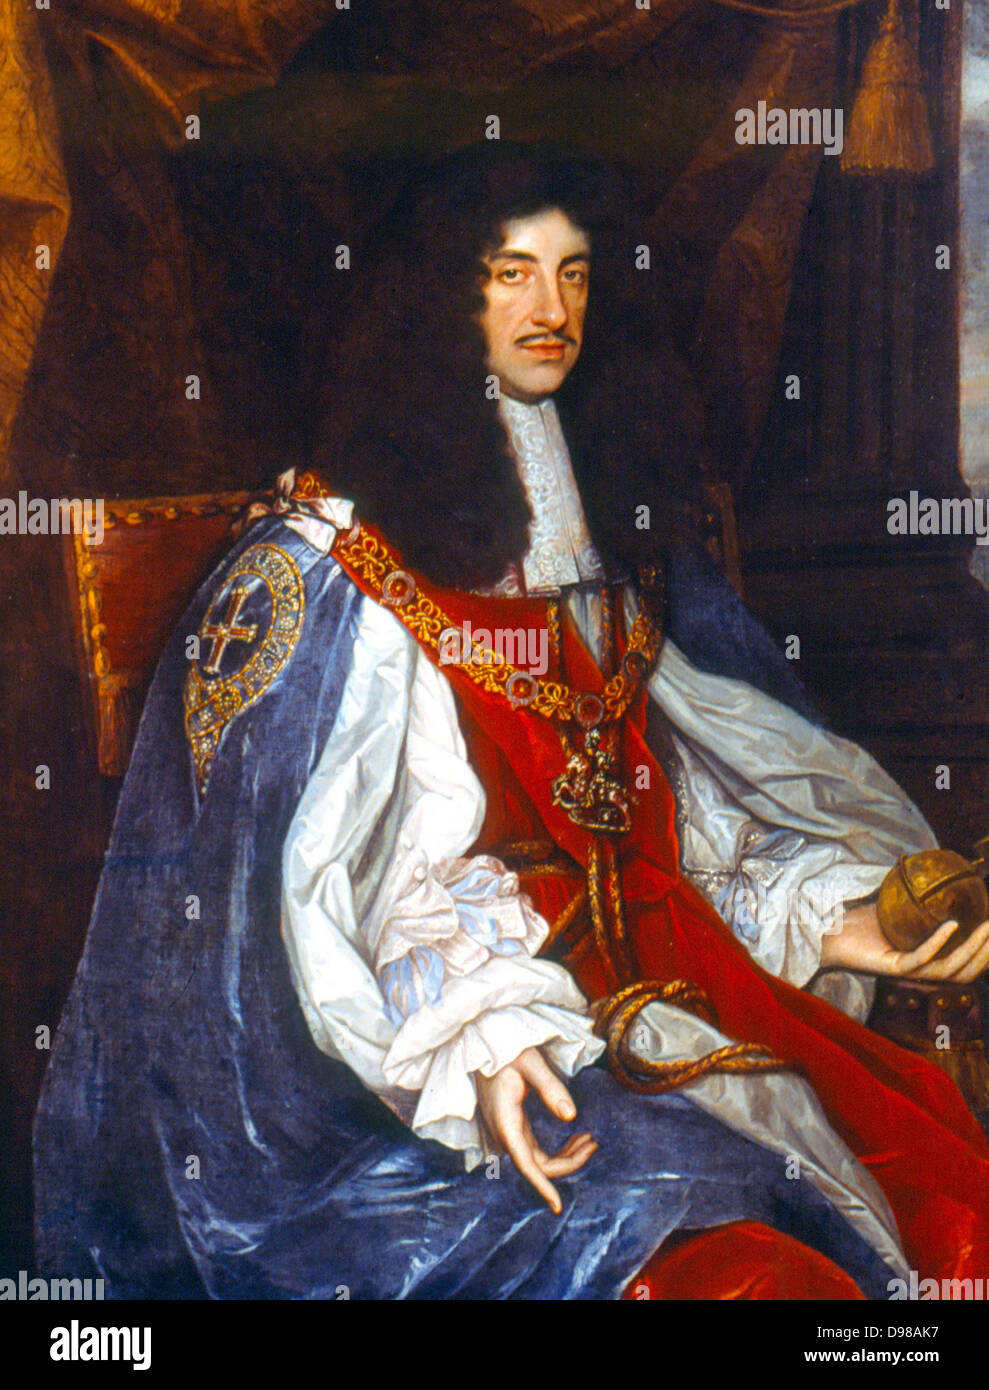 Charles II (1630-1688) King of Britain and Ireland 1660-1688. Portrait from the studio of Michael Wright c1660 at the time of the Restoration of the Monarchy. Stock Photo